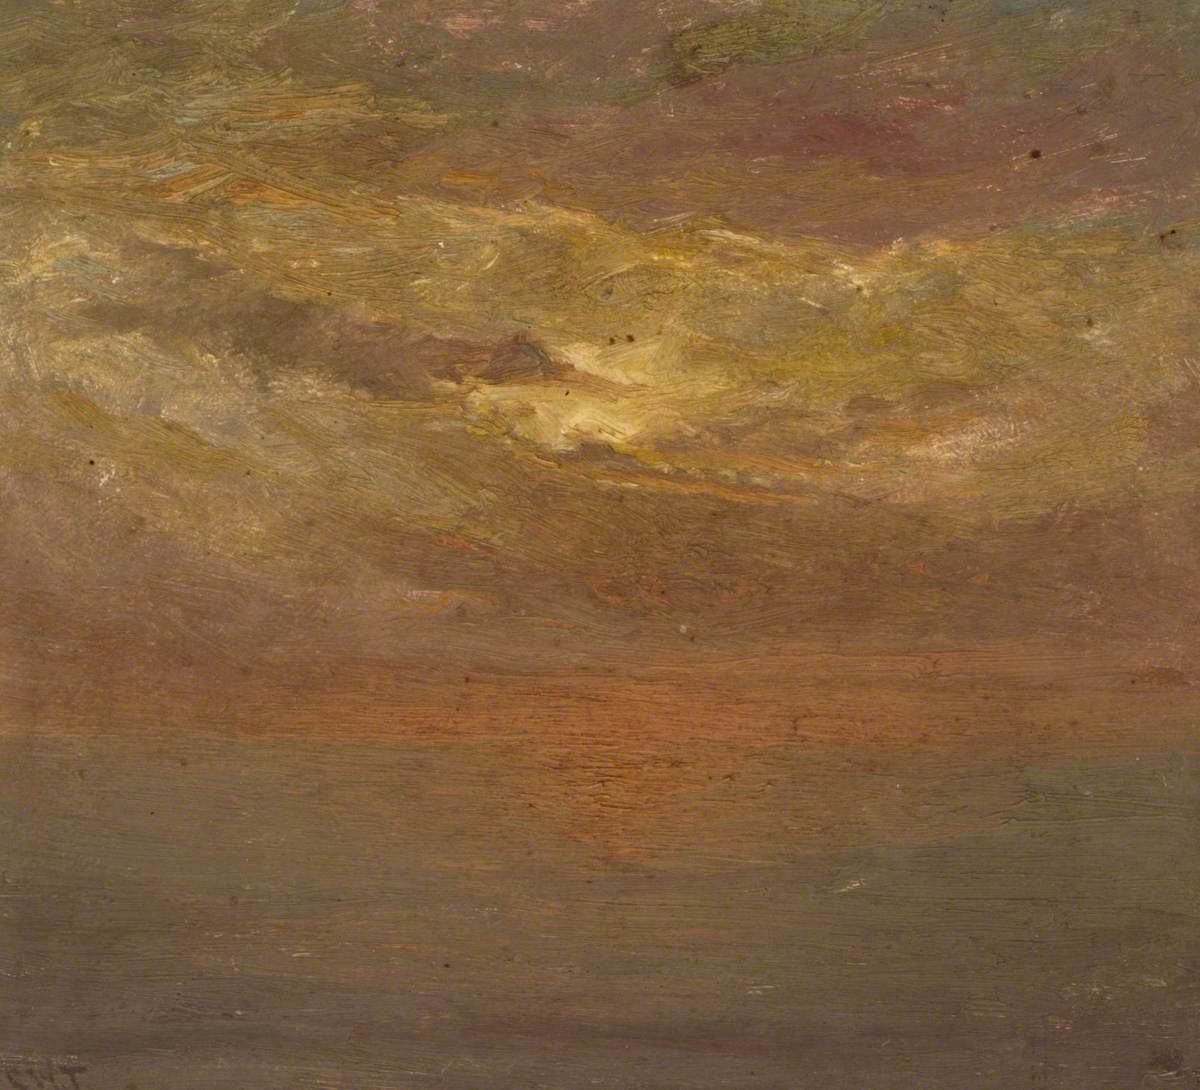 View of the Sky and Sea at Sunset